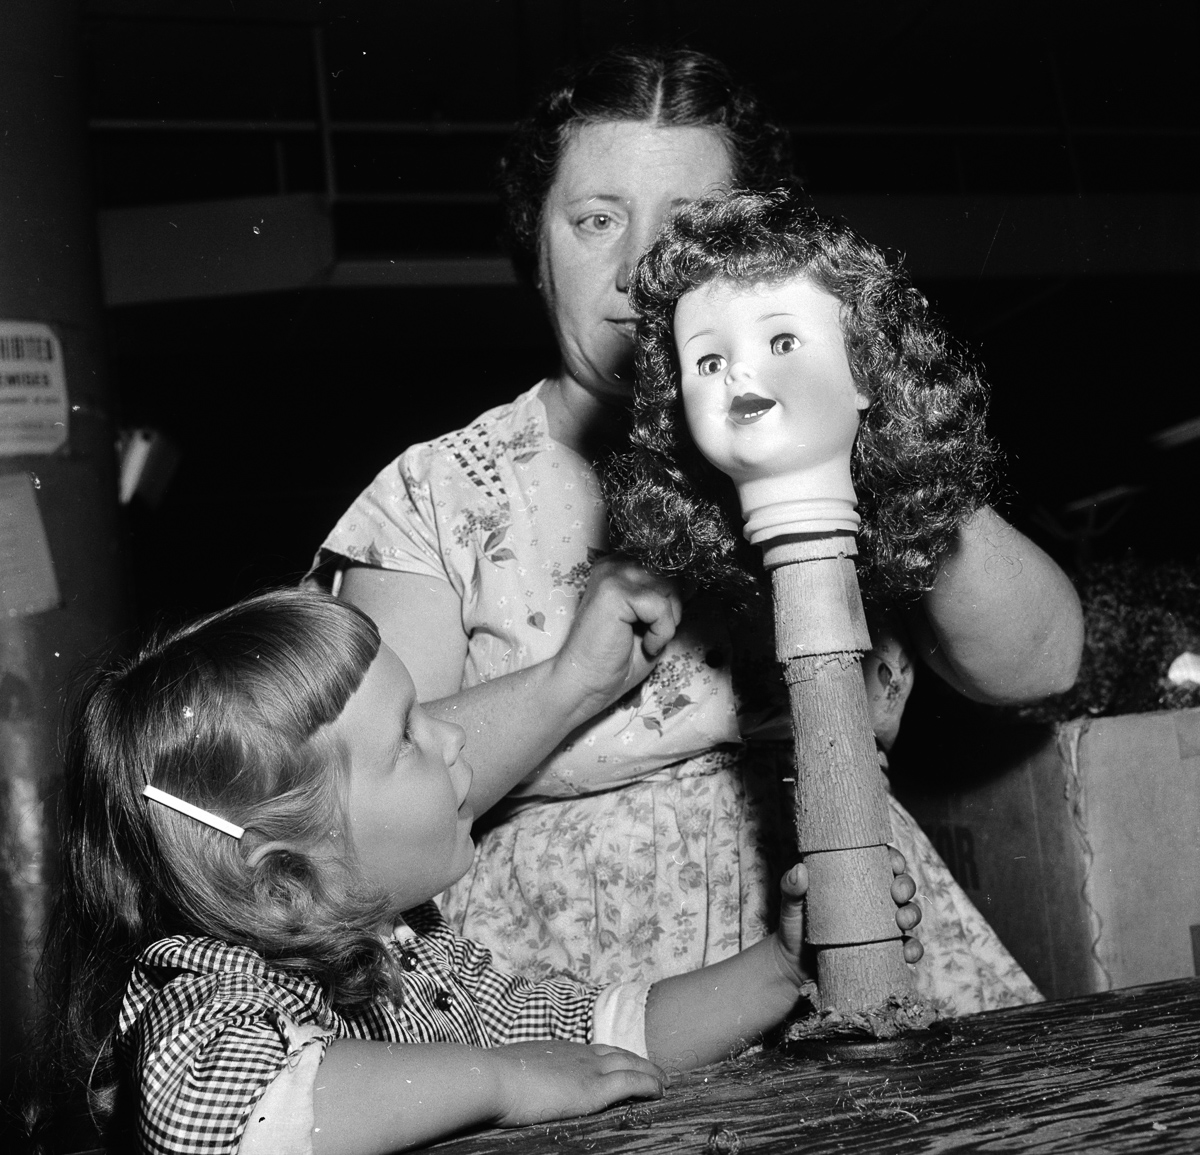 circa 1955: A young girl watching a worker putting hair on a doll's head at the Ideal Toy Company in Jamaica, Long Island, USA. The company is one of the largest toy manufacturers in the world. (Photo by Orlando /Three Lions/Getty Images)